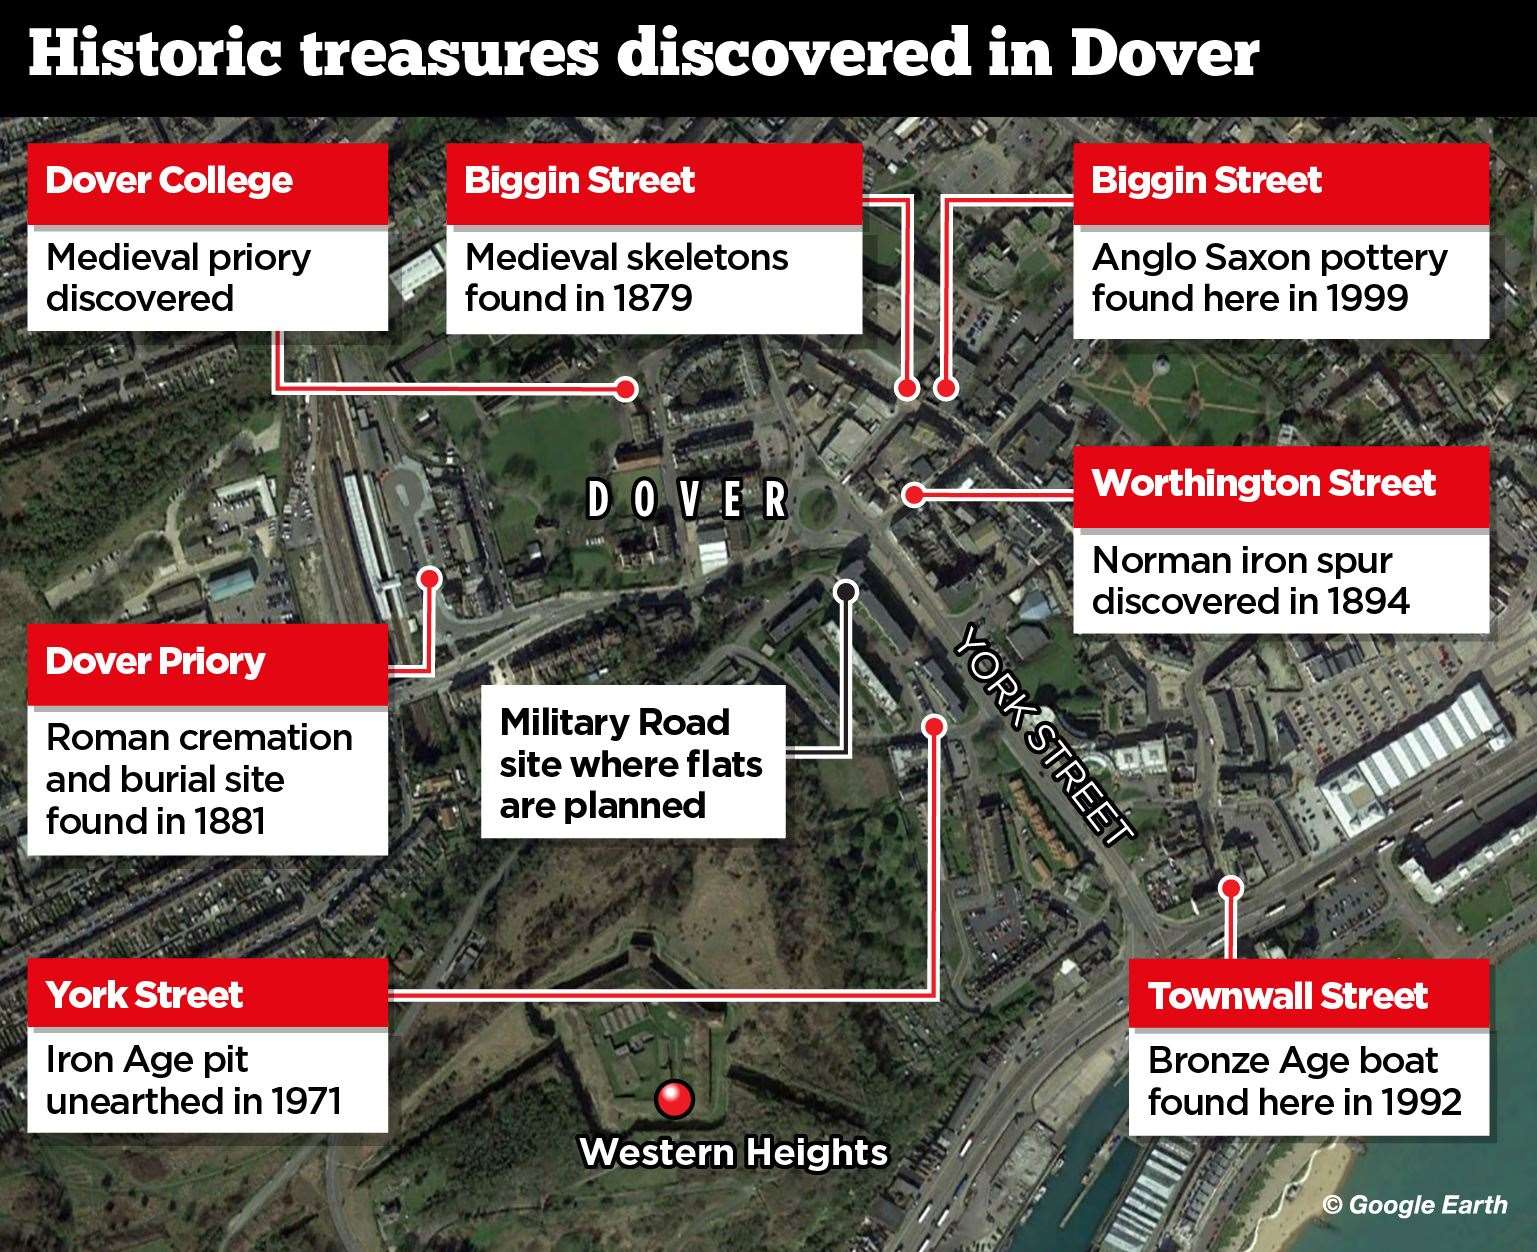 Many other historic treasures have been found in the area surrounding Military Road